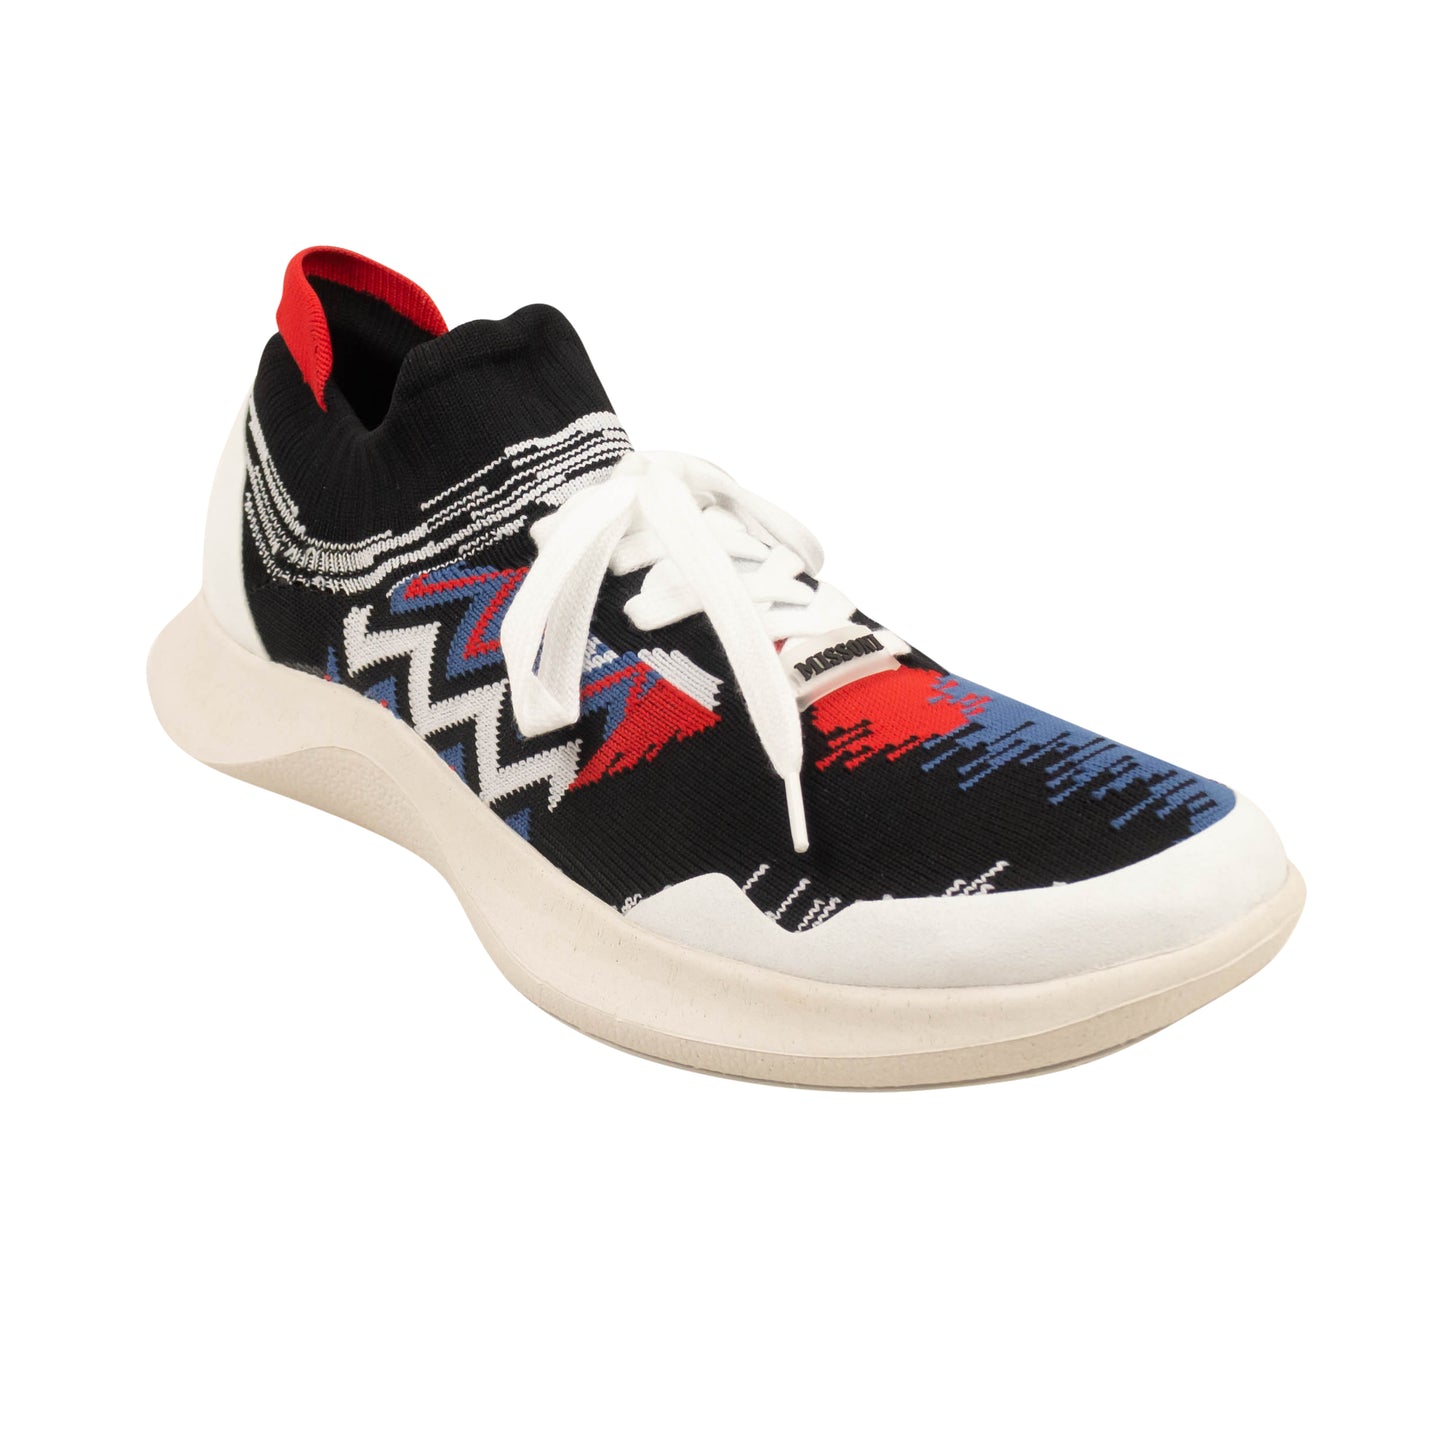 Missoni Acbc"" Fly Knit Sneakers - Black/Red